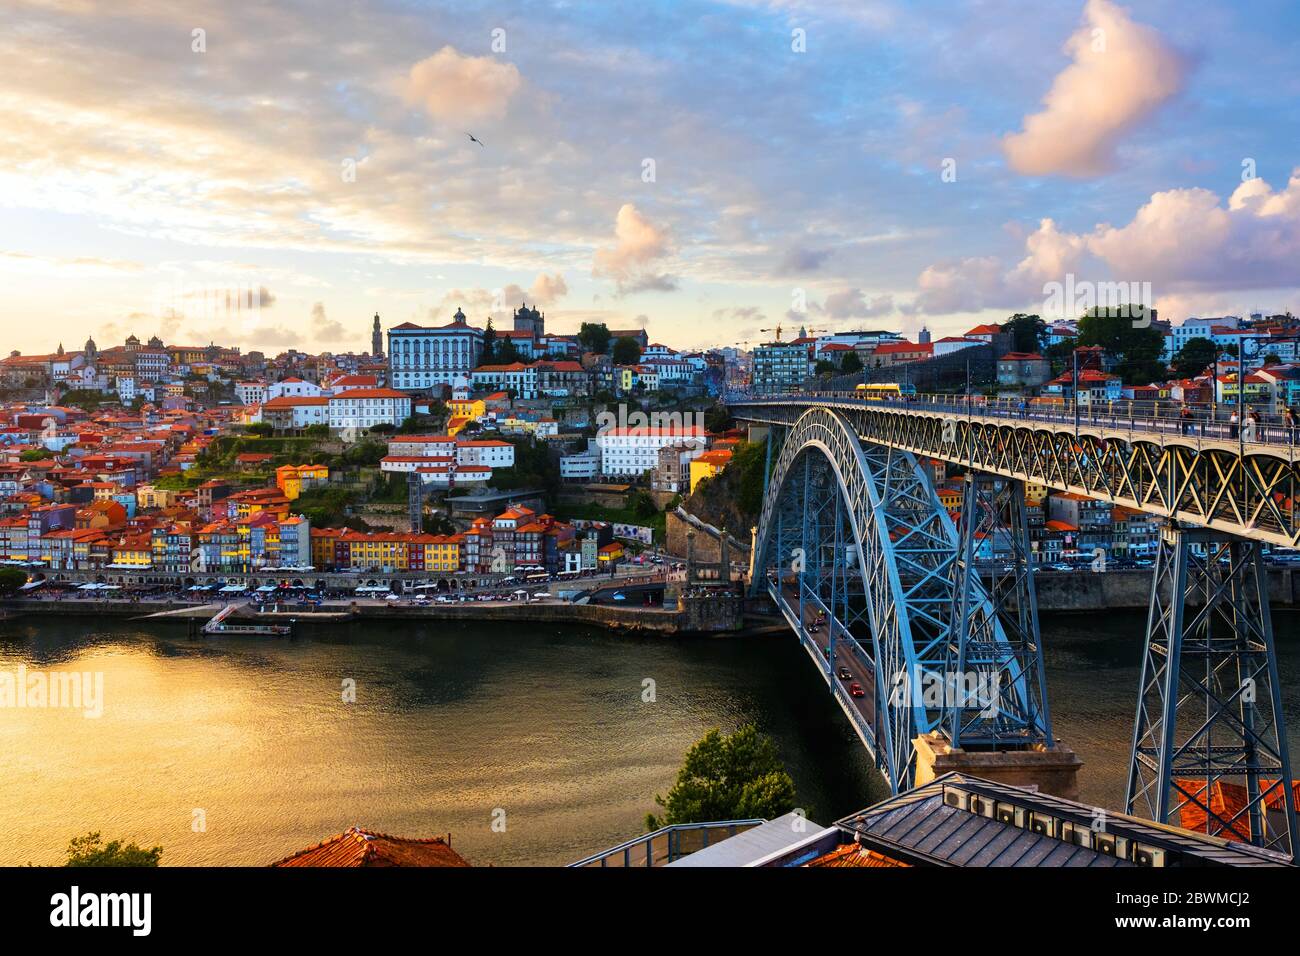 Porto, Portugal. Aerial view of Ribeira area in Porto, Portugal during a sunny evening with river, colorful buildings and bridge Stock Photo